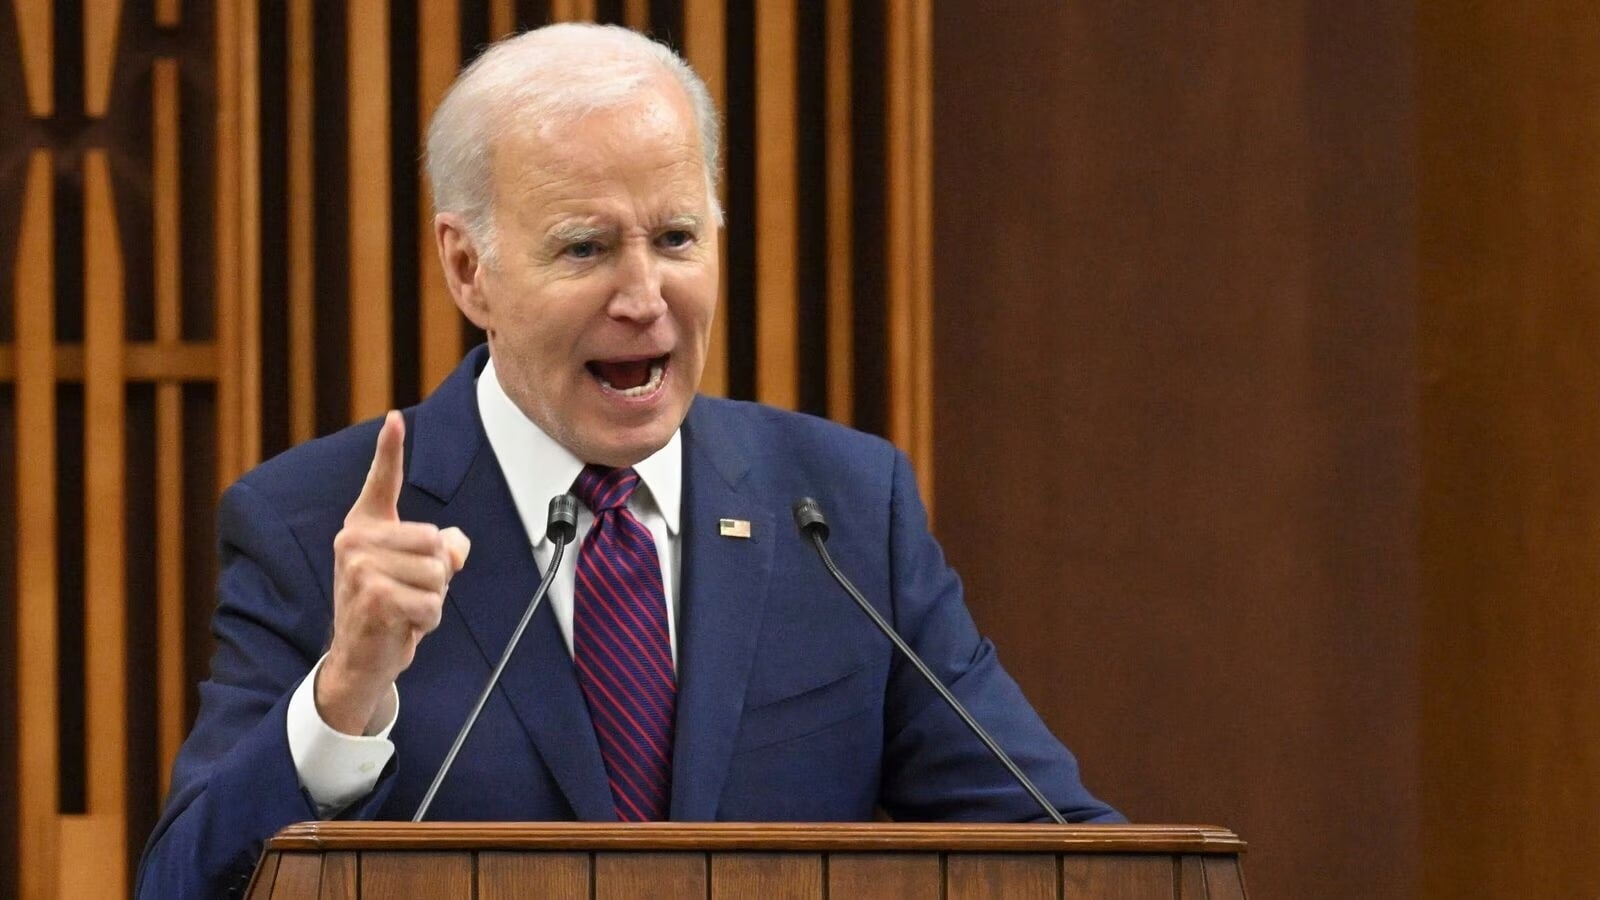 Biden forced to address the Iran backed attack without causing another war (Credits: Mint)